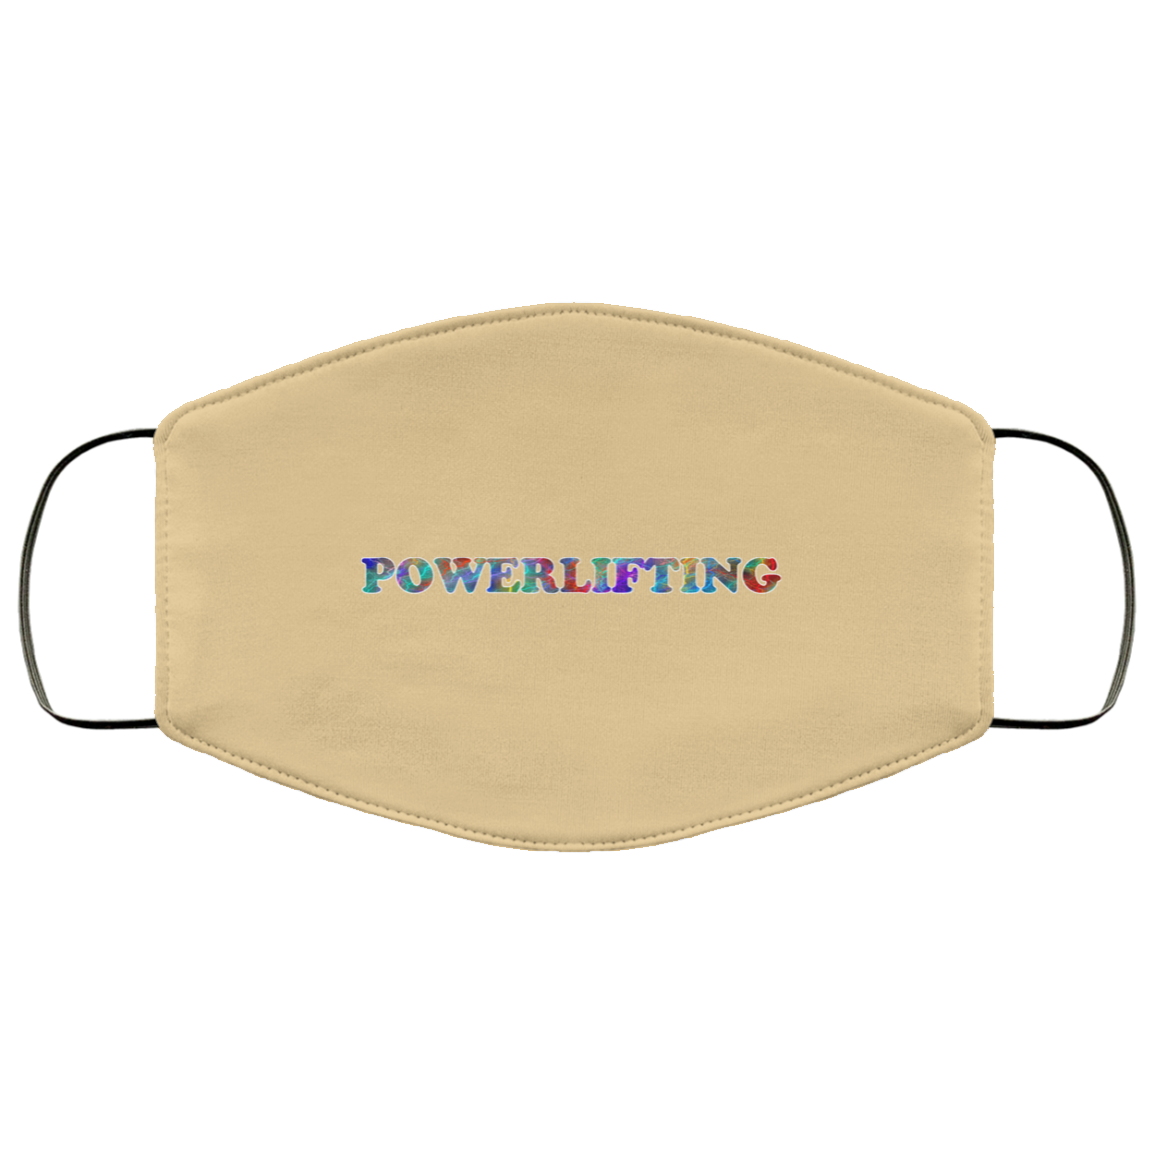 Powerlifting 2 Layer Protective Mask